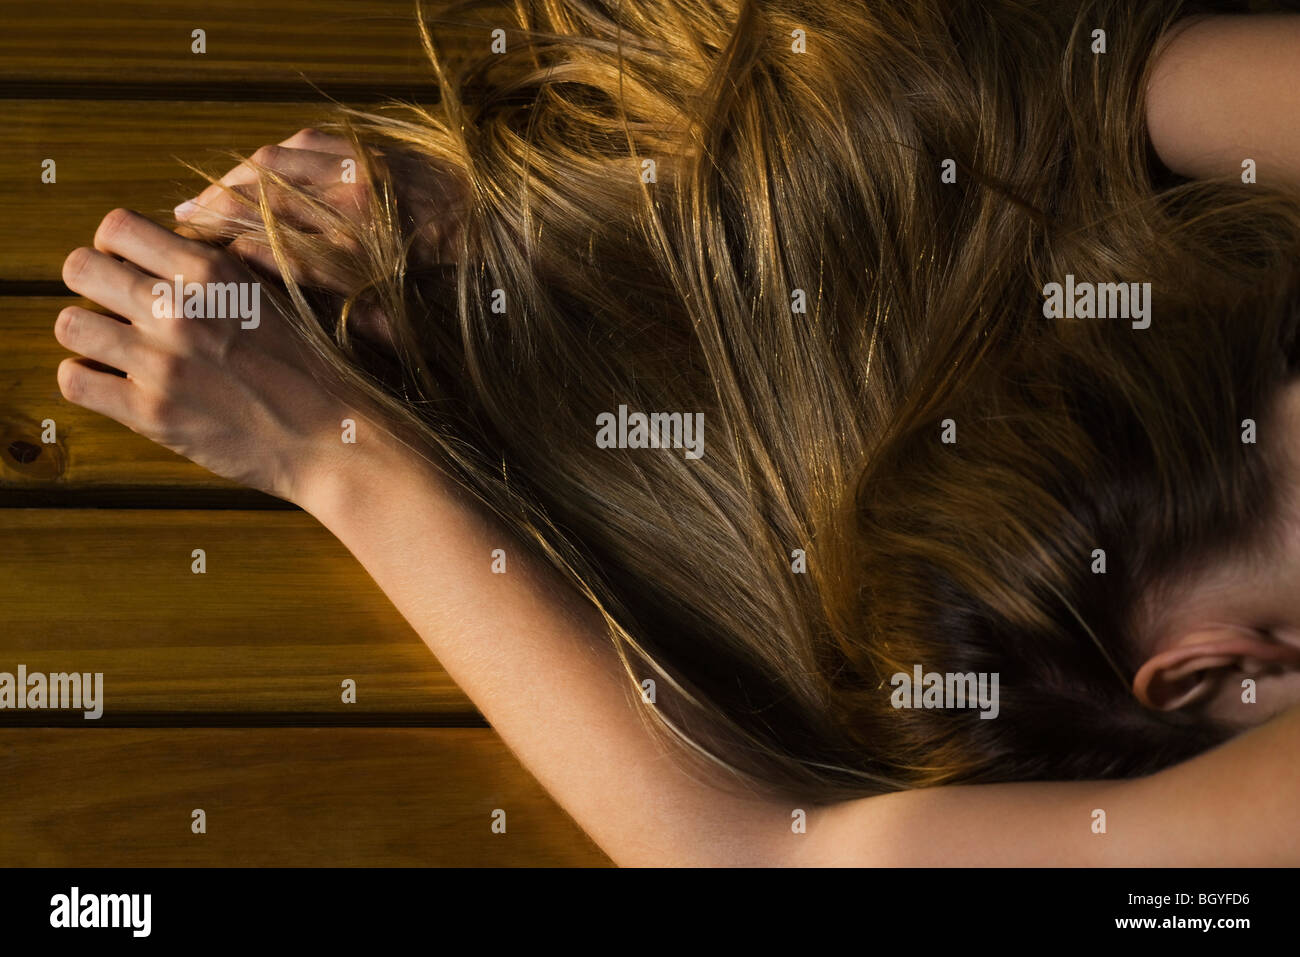 Woman lying face down on floor, long hair covering arm, cropped Stock Photo 27649698 Alamy